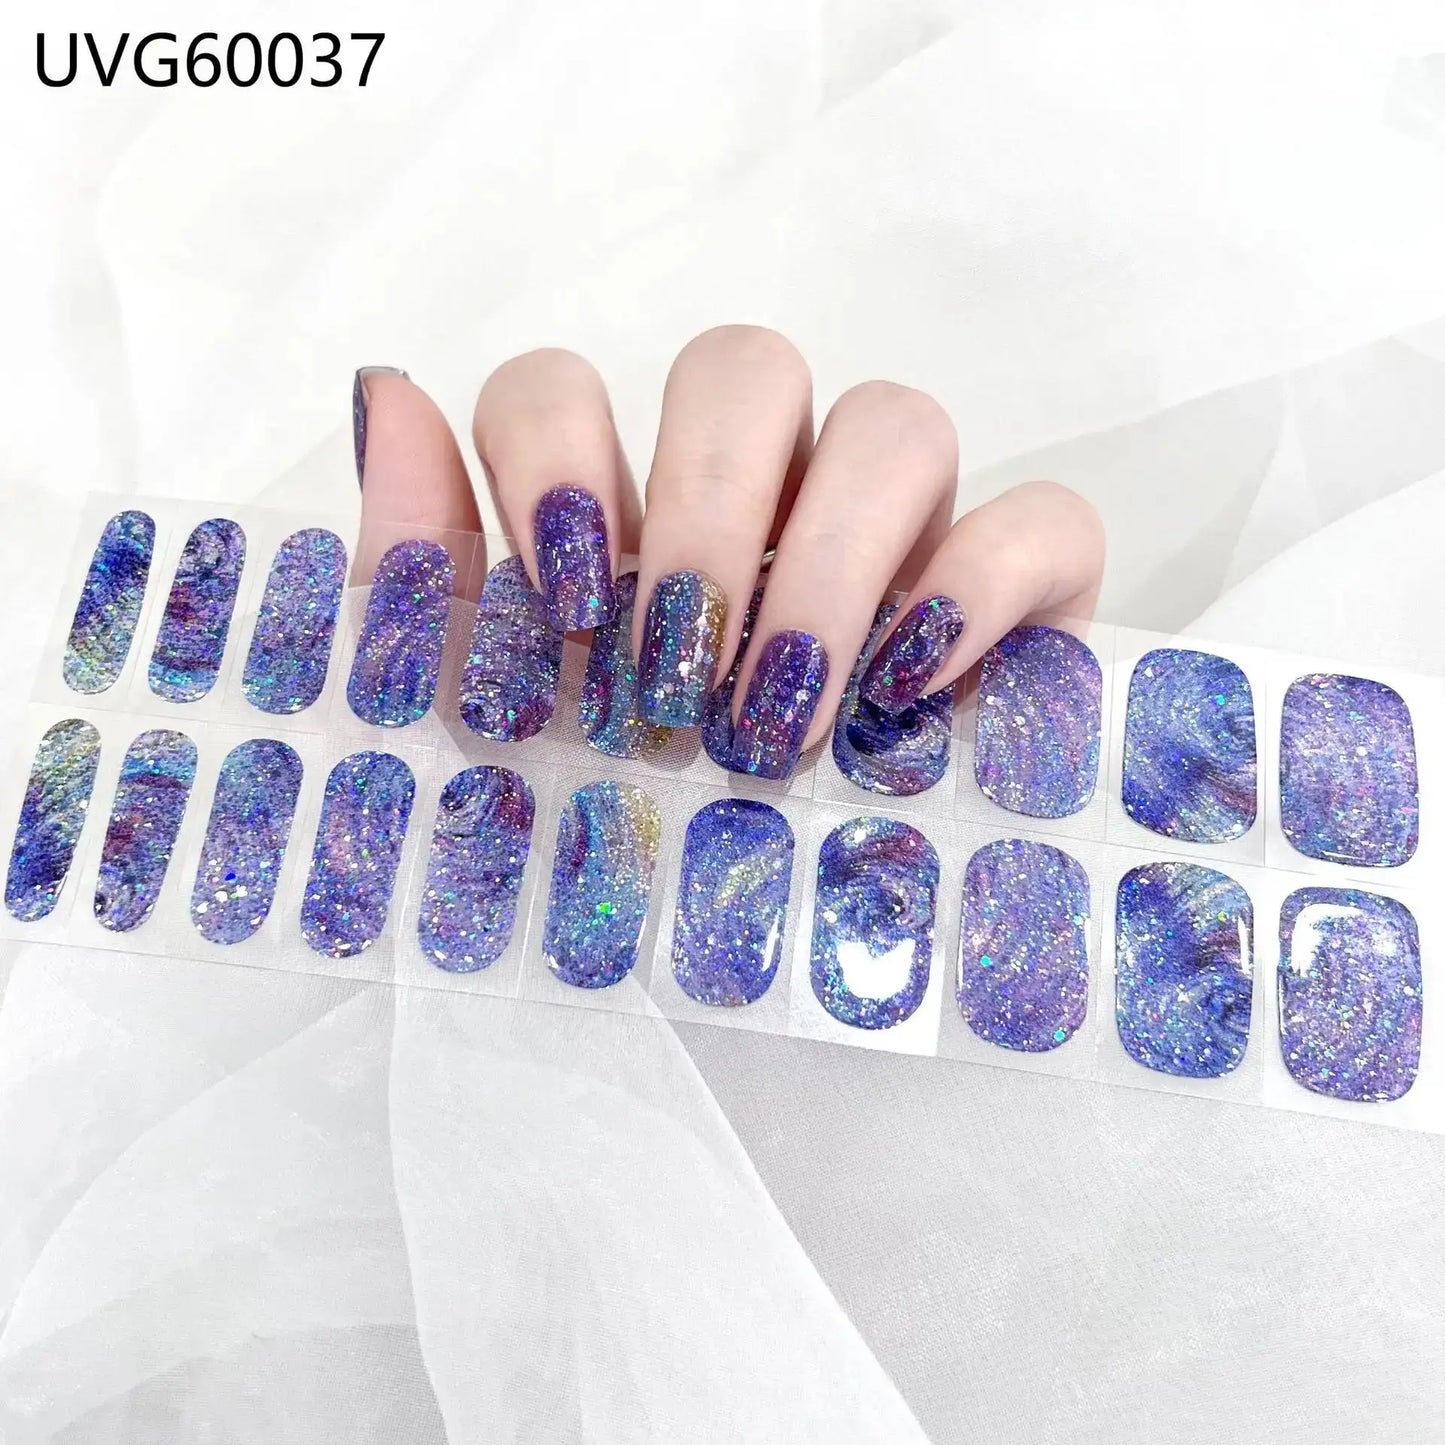 22 Tips Semi-Cured Gel Nail Stickers - Salon-Worthy Nails at Home